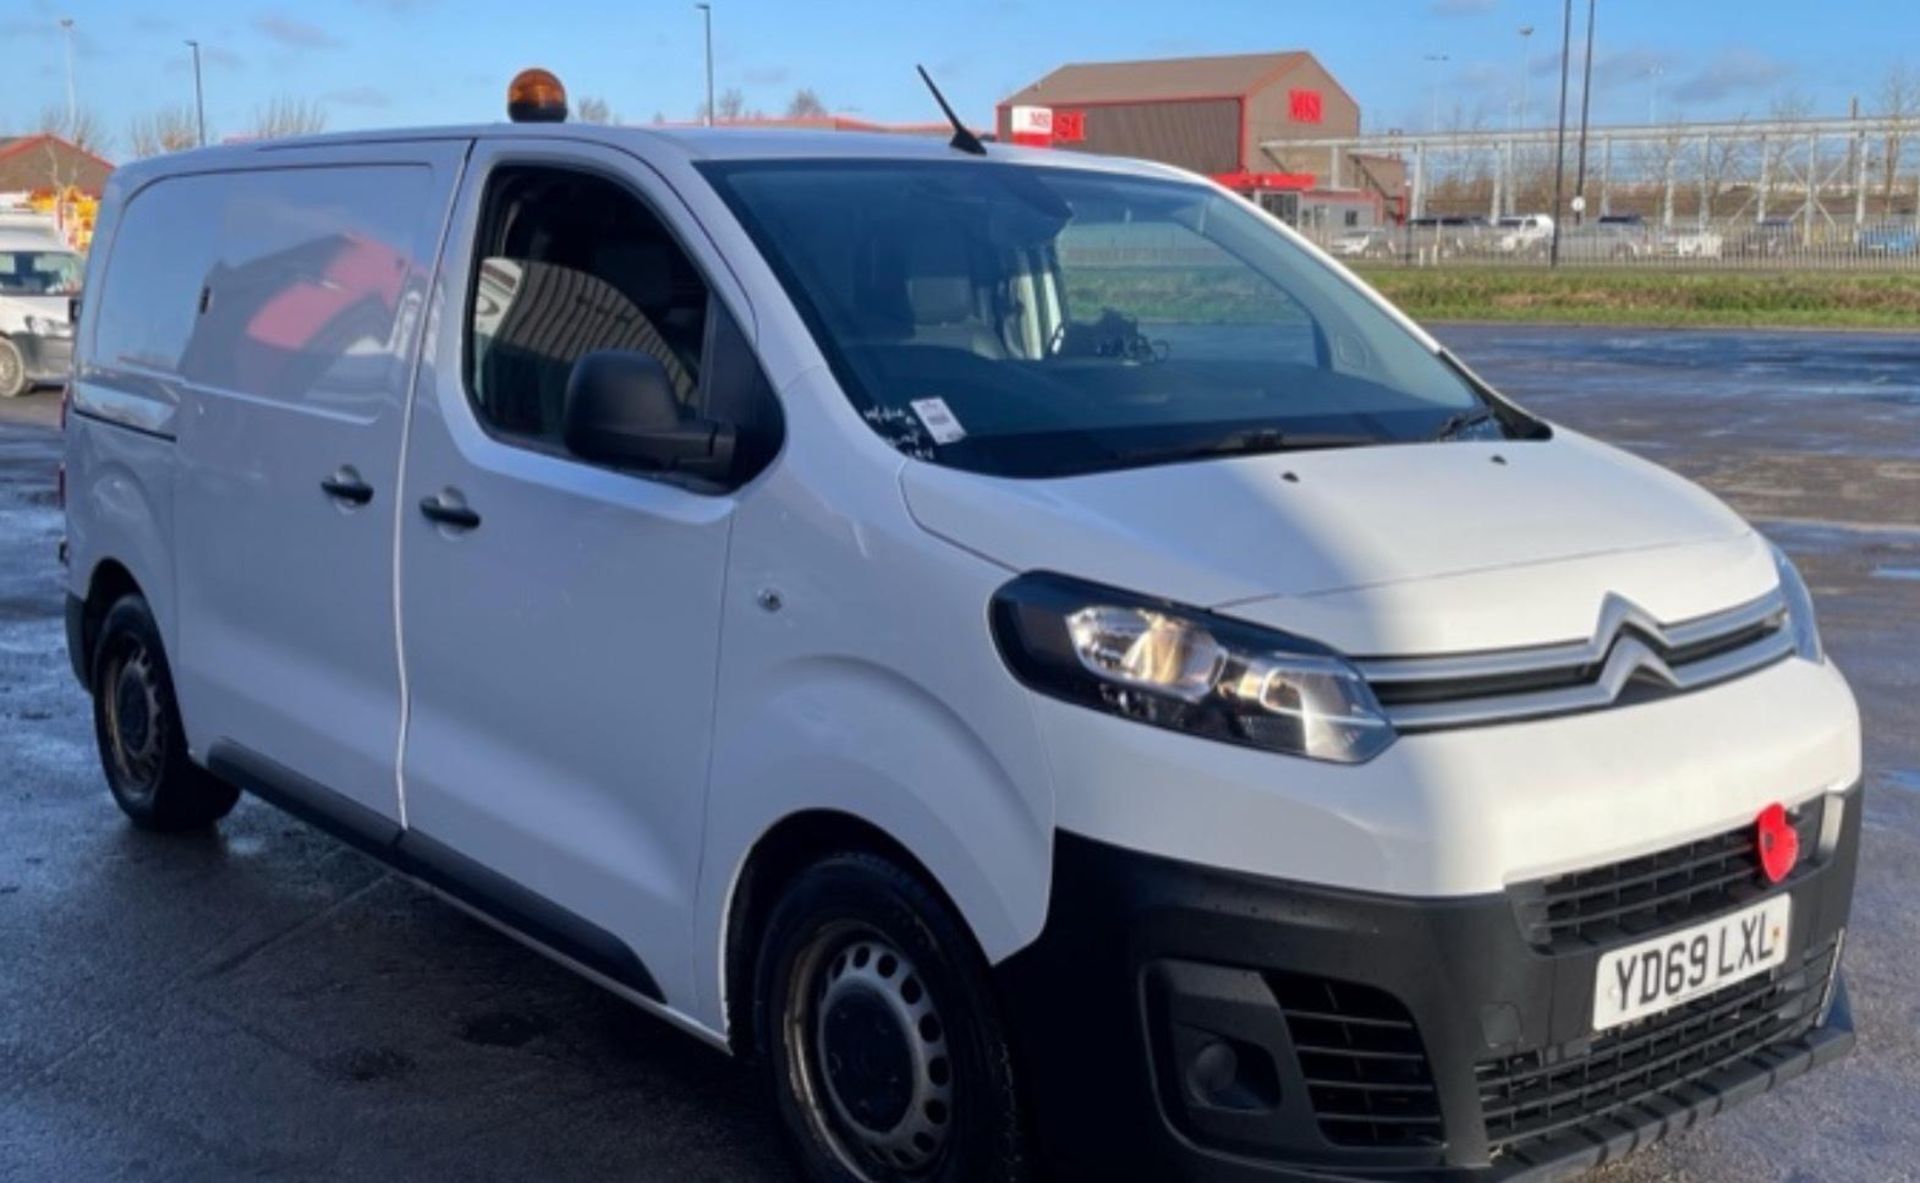 2019 CITROEN DISPATCH 111K MILES -HPI CLEAR -READY FOR WORKE!